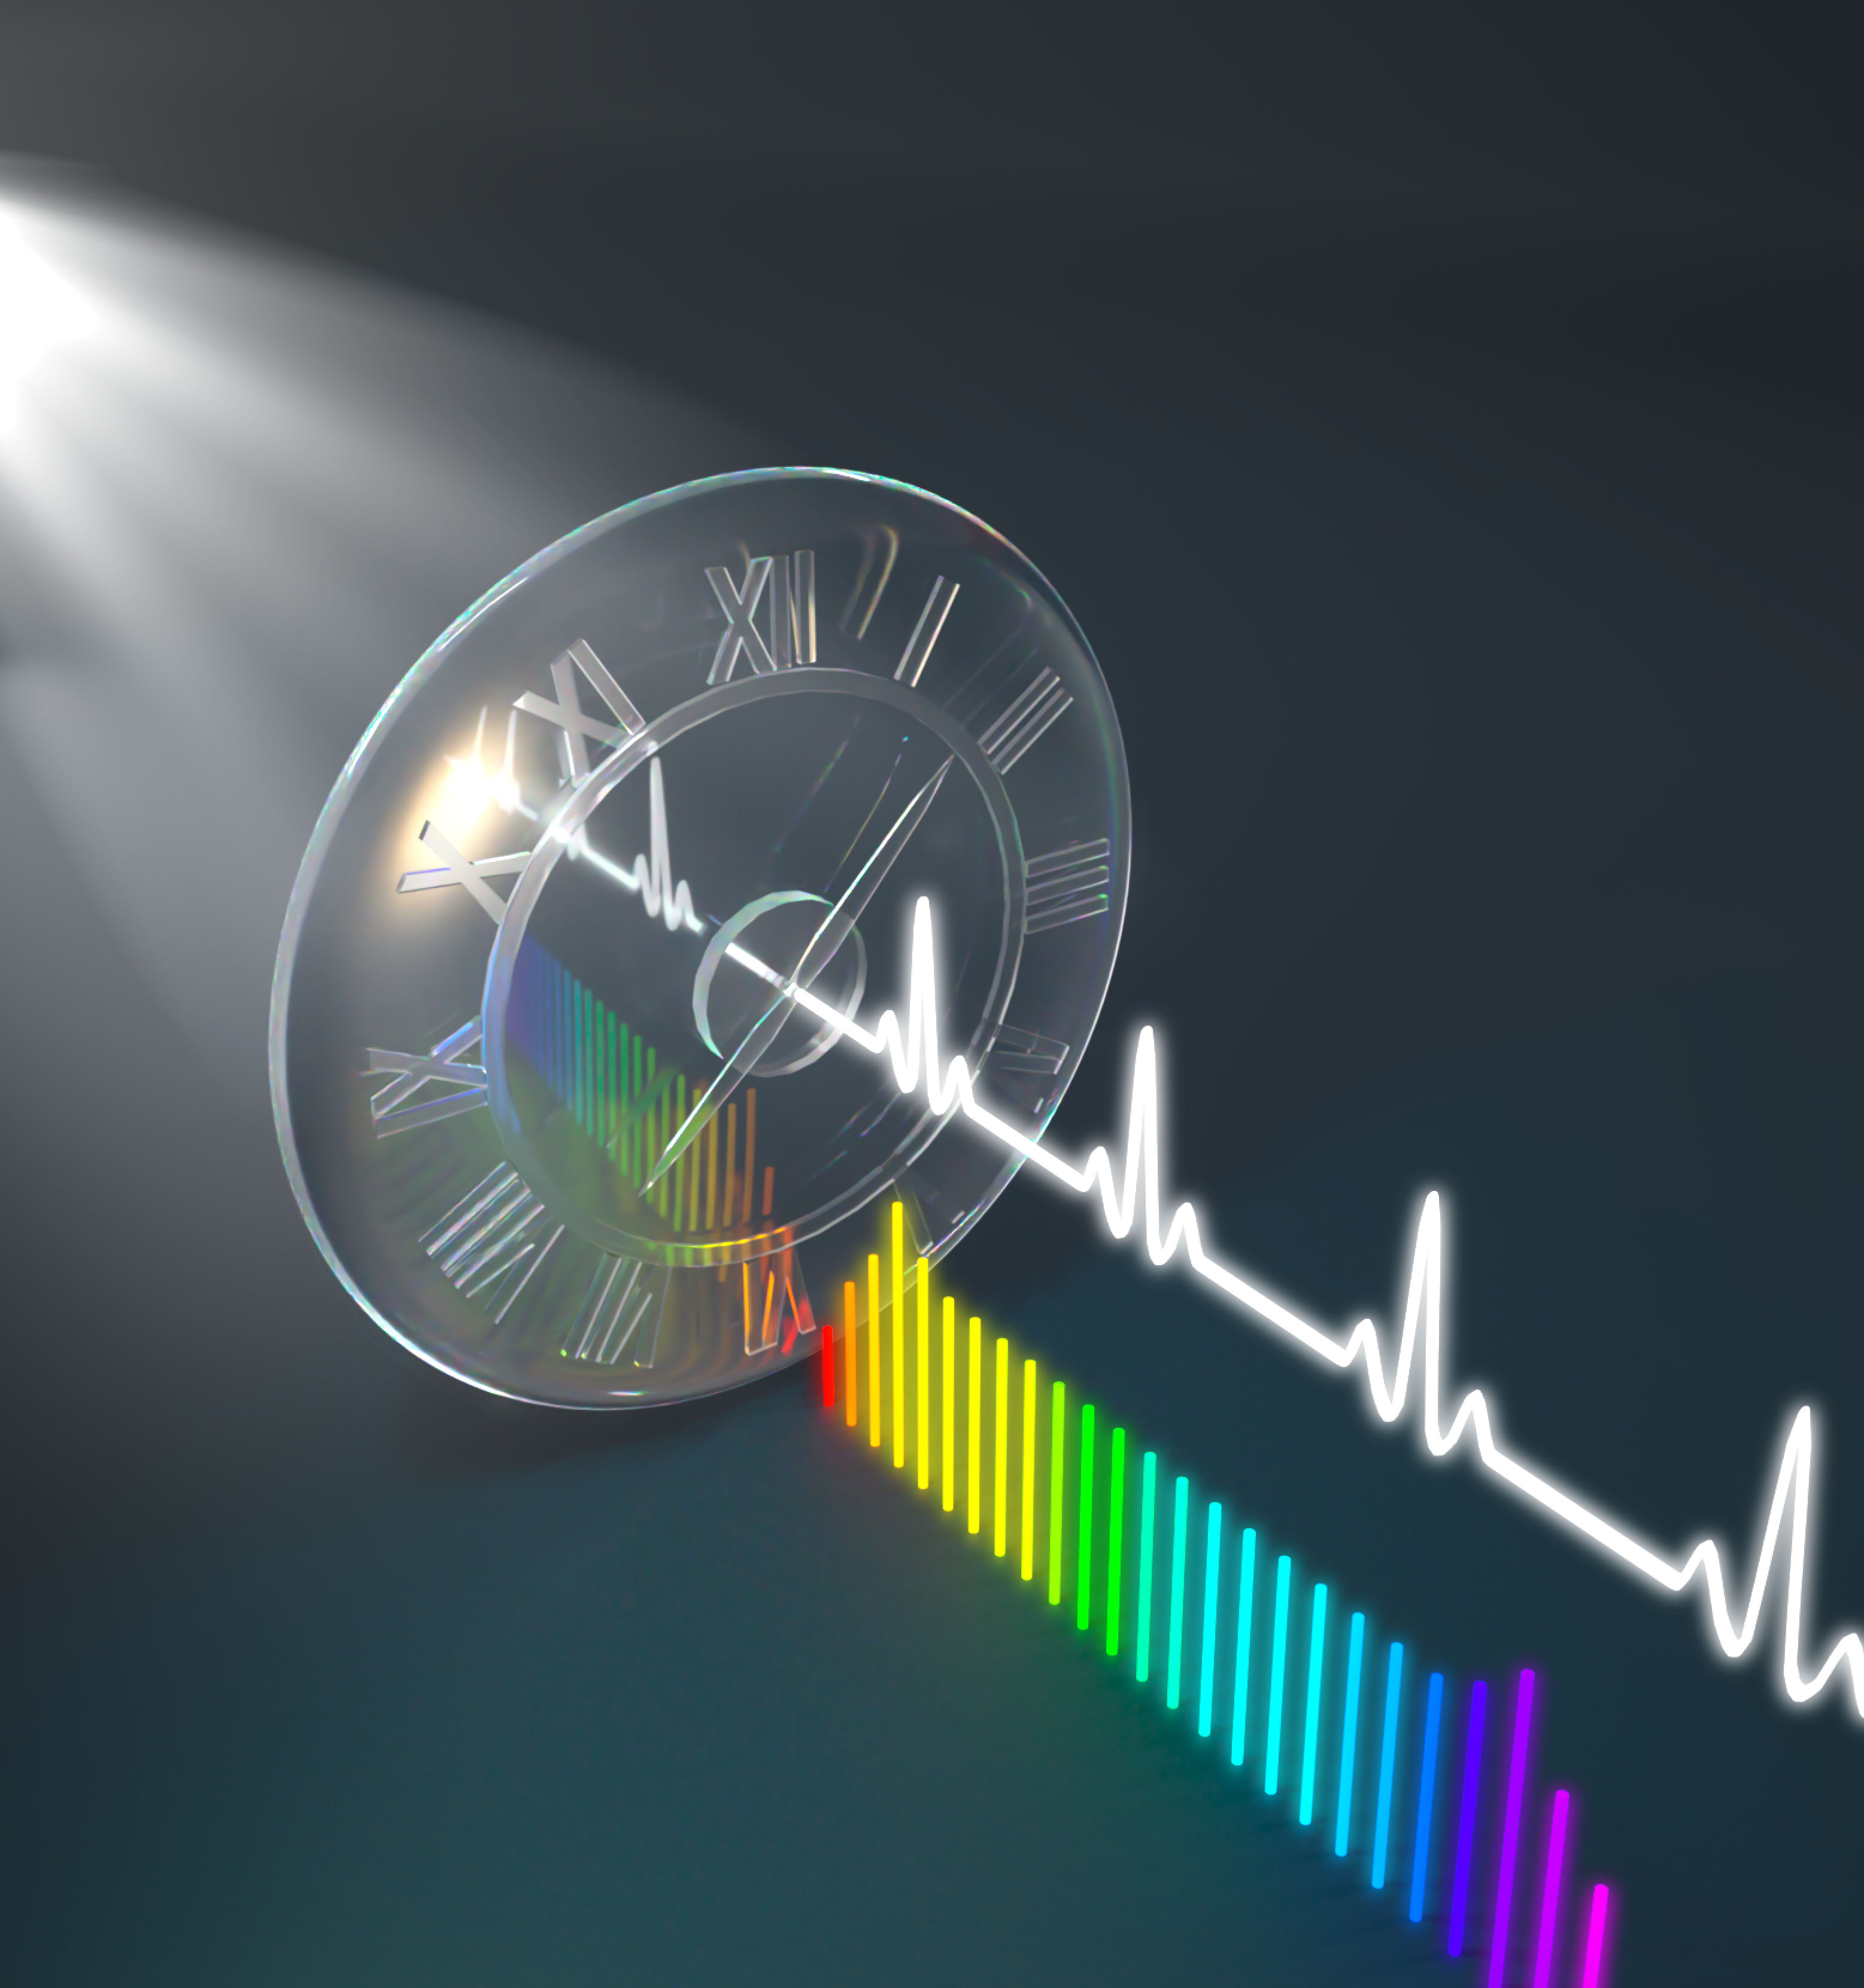  time lens transforms a continuous-wave, single-color laser beam into a high-performance, on-chip femtosecond pulse source